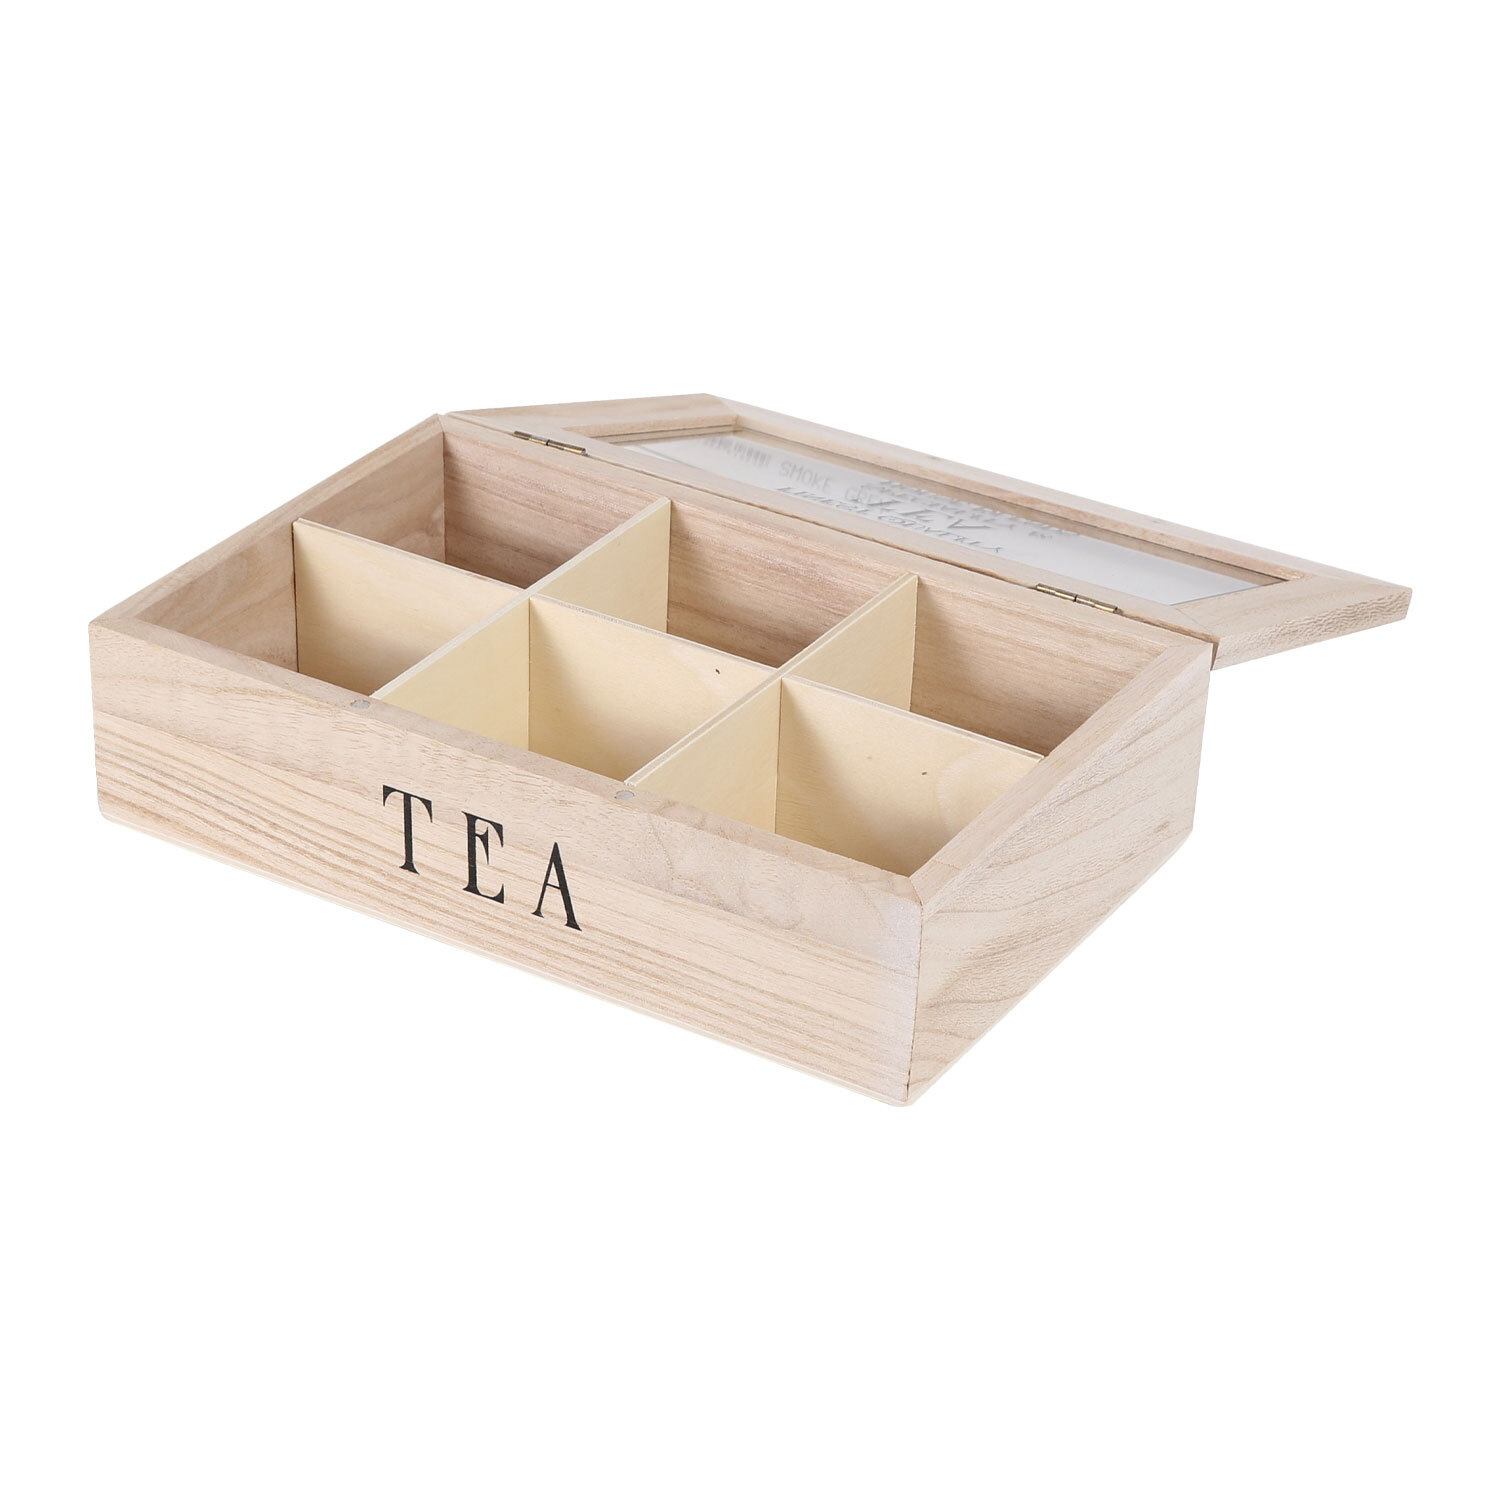 Tea Box with 6 Compartments Image 2